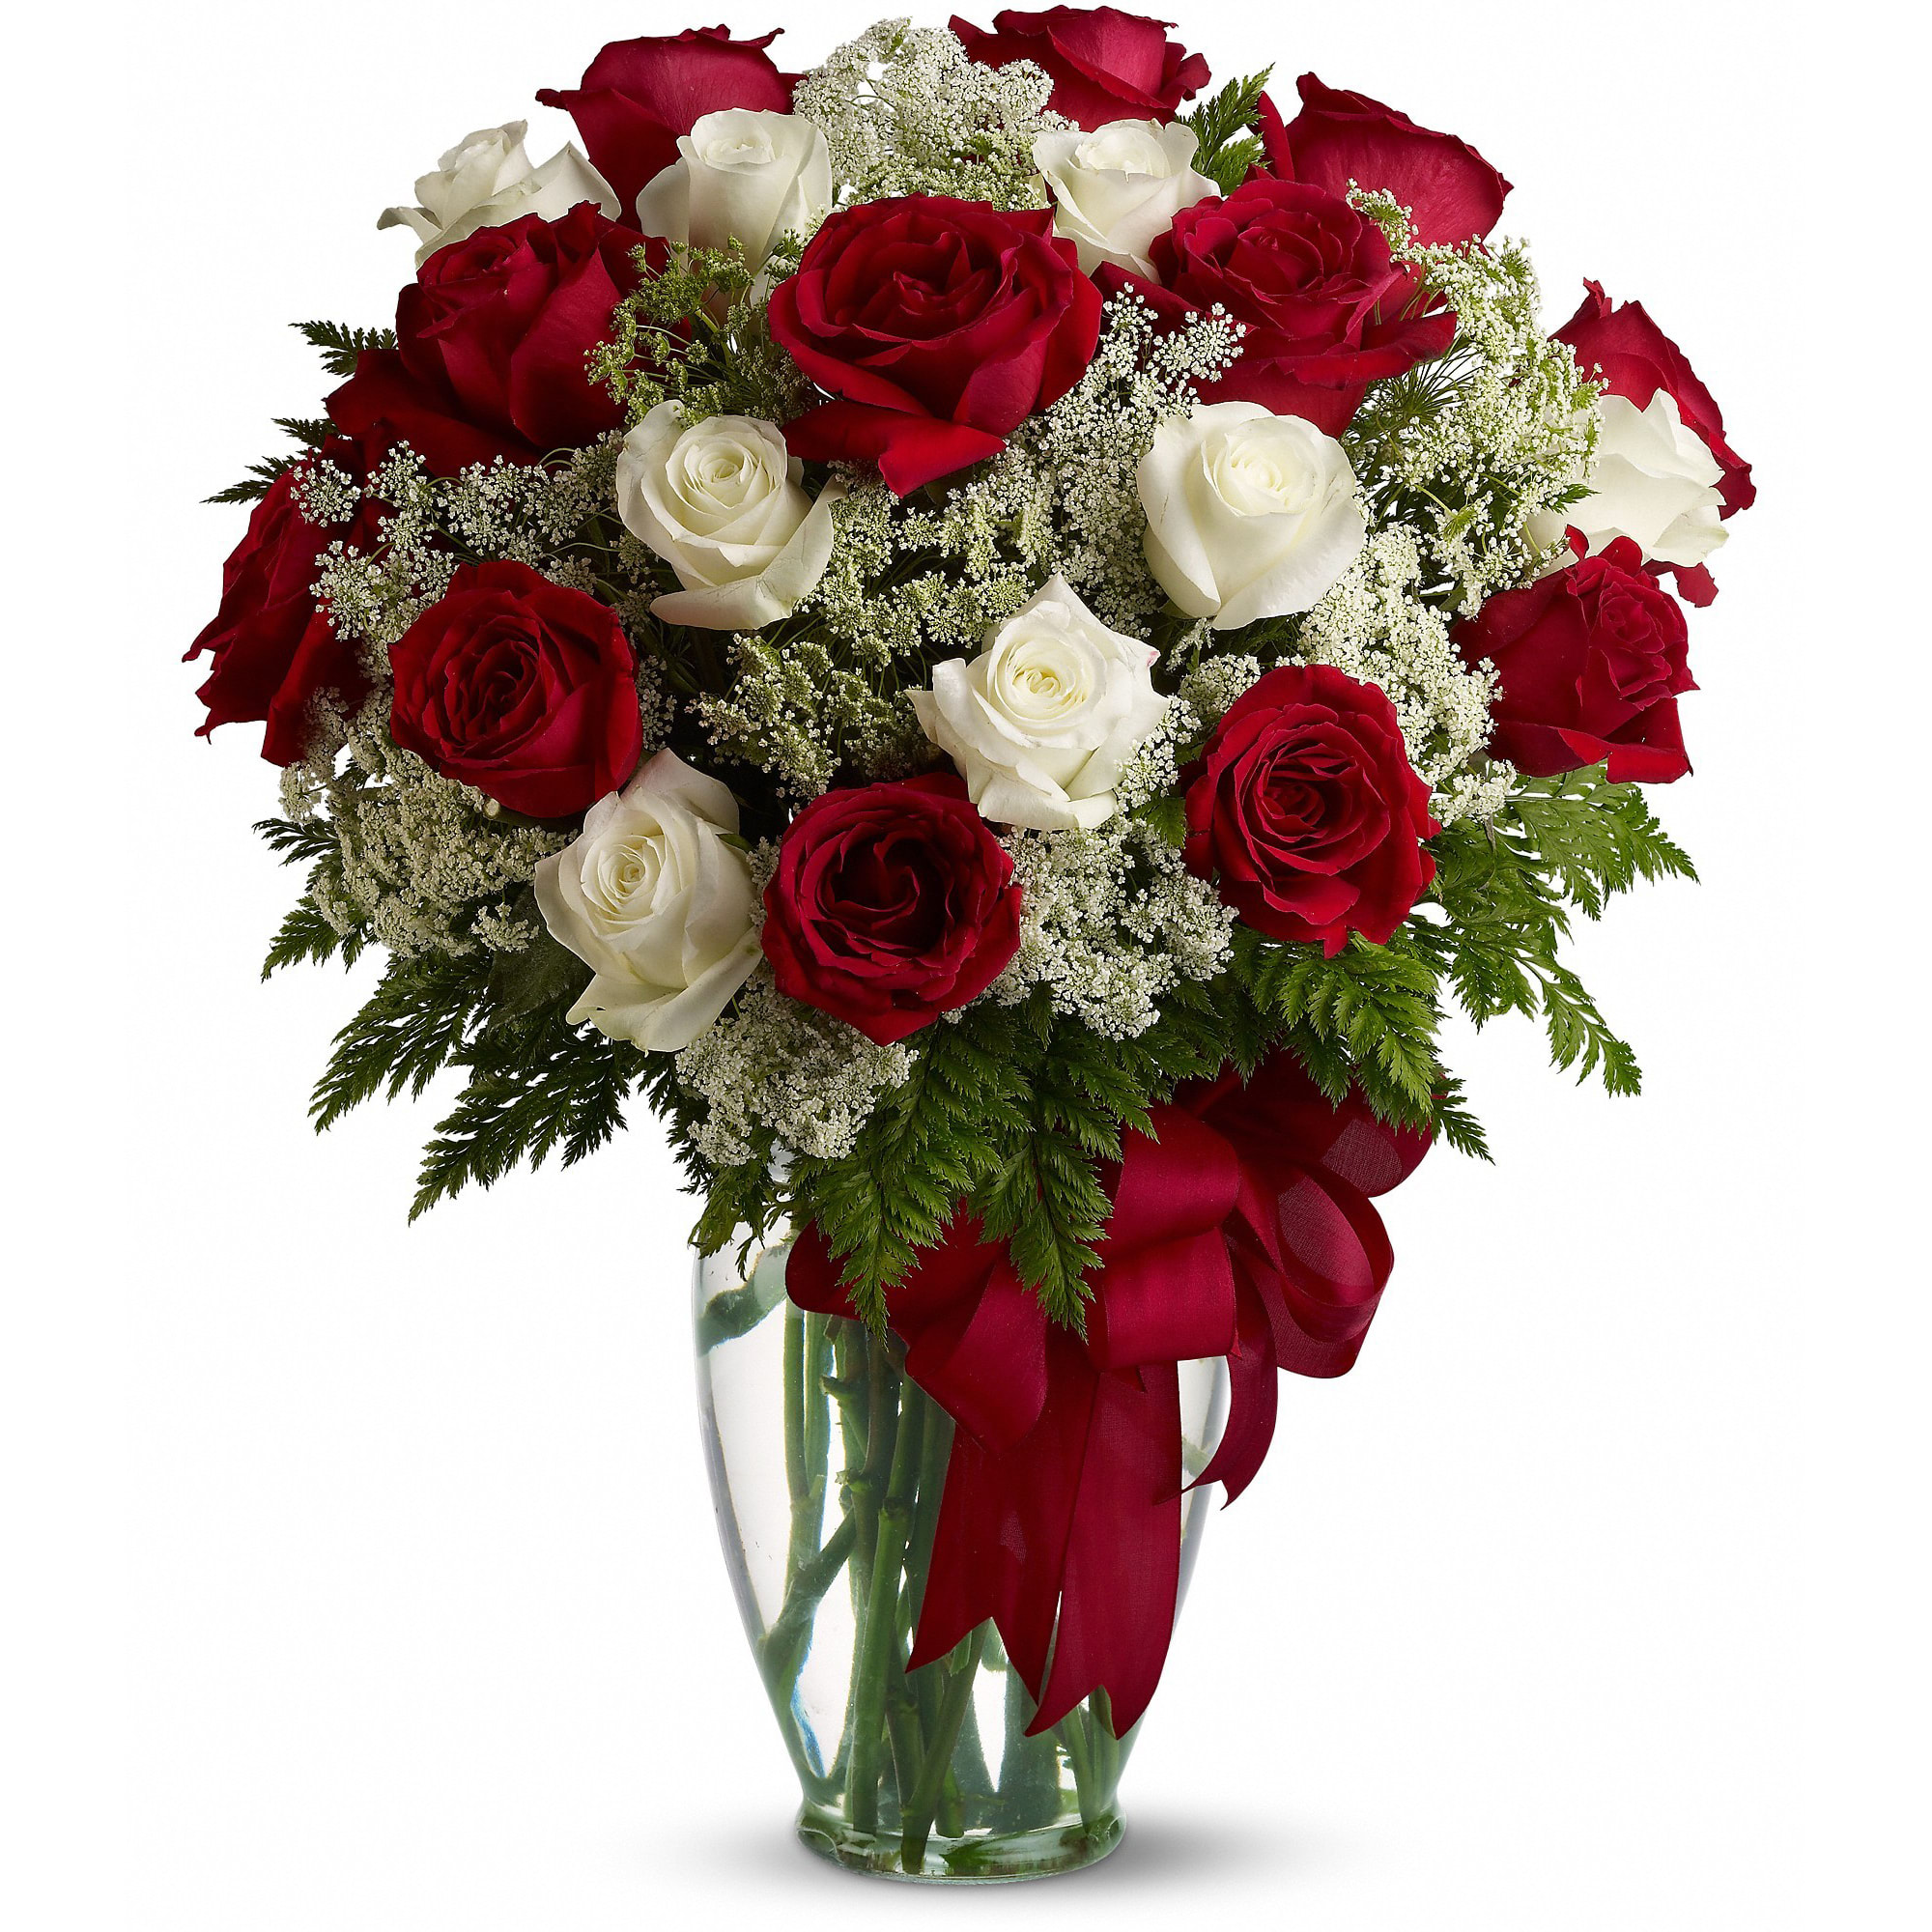 Love's Divine Bouquet - Long Stemmed Roses - Love's divine, and roses are too. At almost two feet tall, this beautiful mix of red and white roses - accented with Queen Anne's Lace, and adorned with a bold red ribbon - is a timeless gift for your beloved.  Red and white roses accented with Queen Anne's lace and more are delivered in a glass vase accented with a red satin ribbon.  Approximately 18&quot; W x 23&quot; H  Orientation: All-Around      As Shown : T11Z101A     Deluxe : T11Z101B     Premium : T11Z101C  